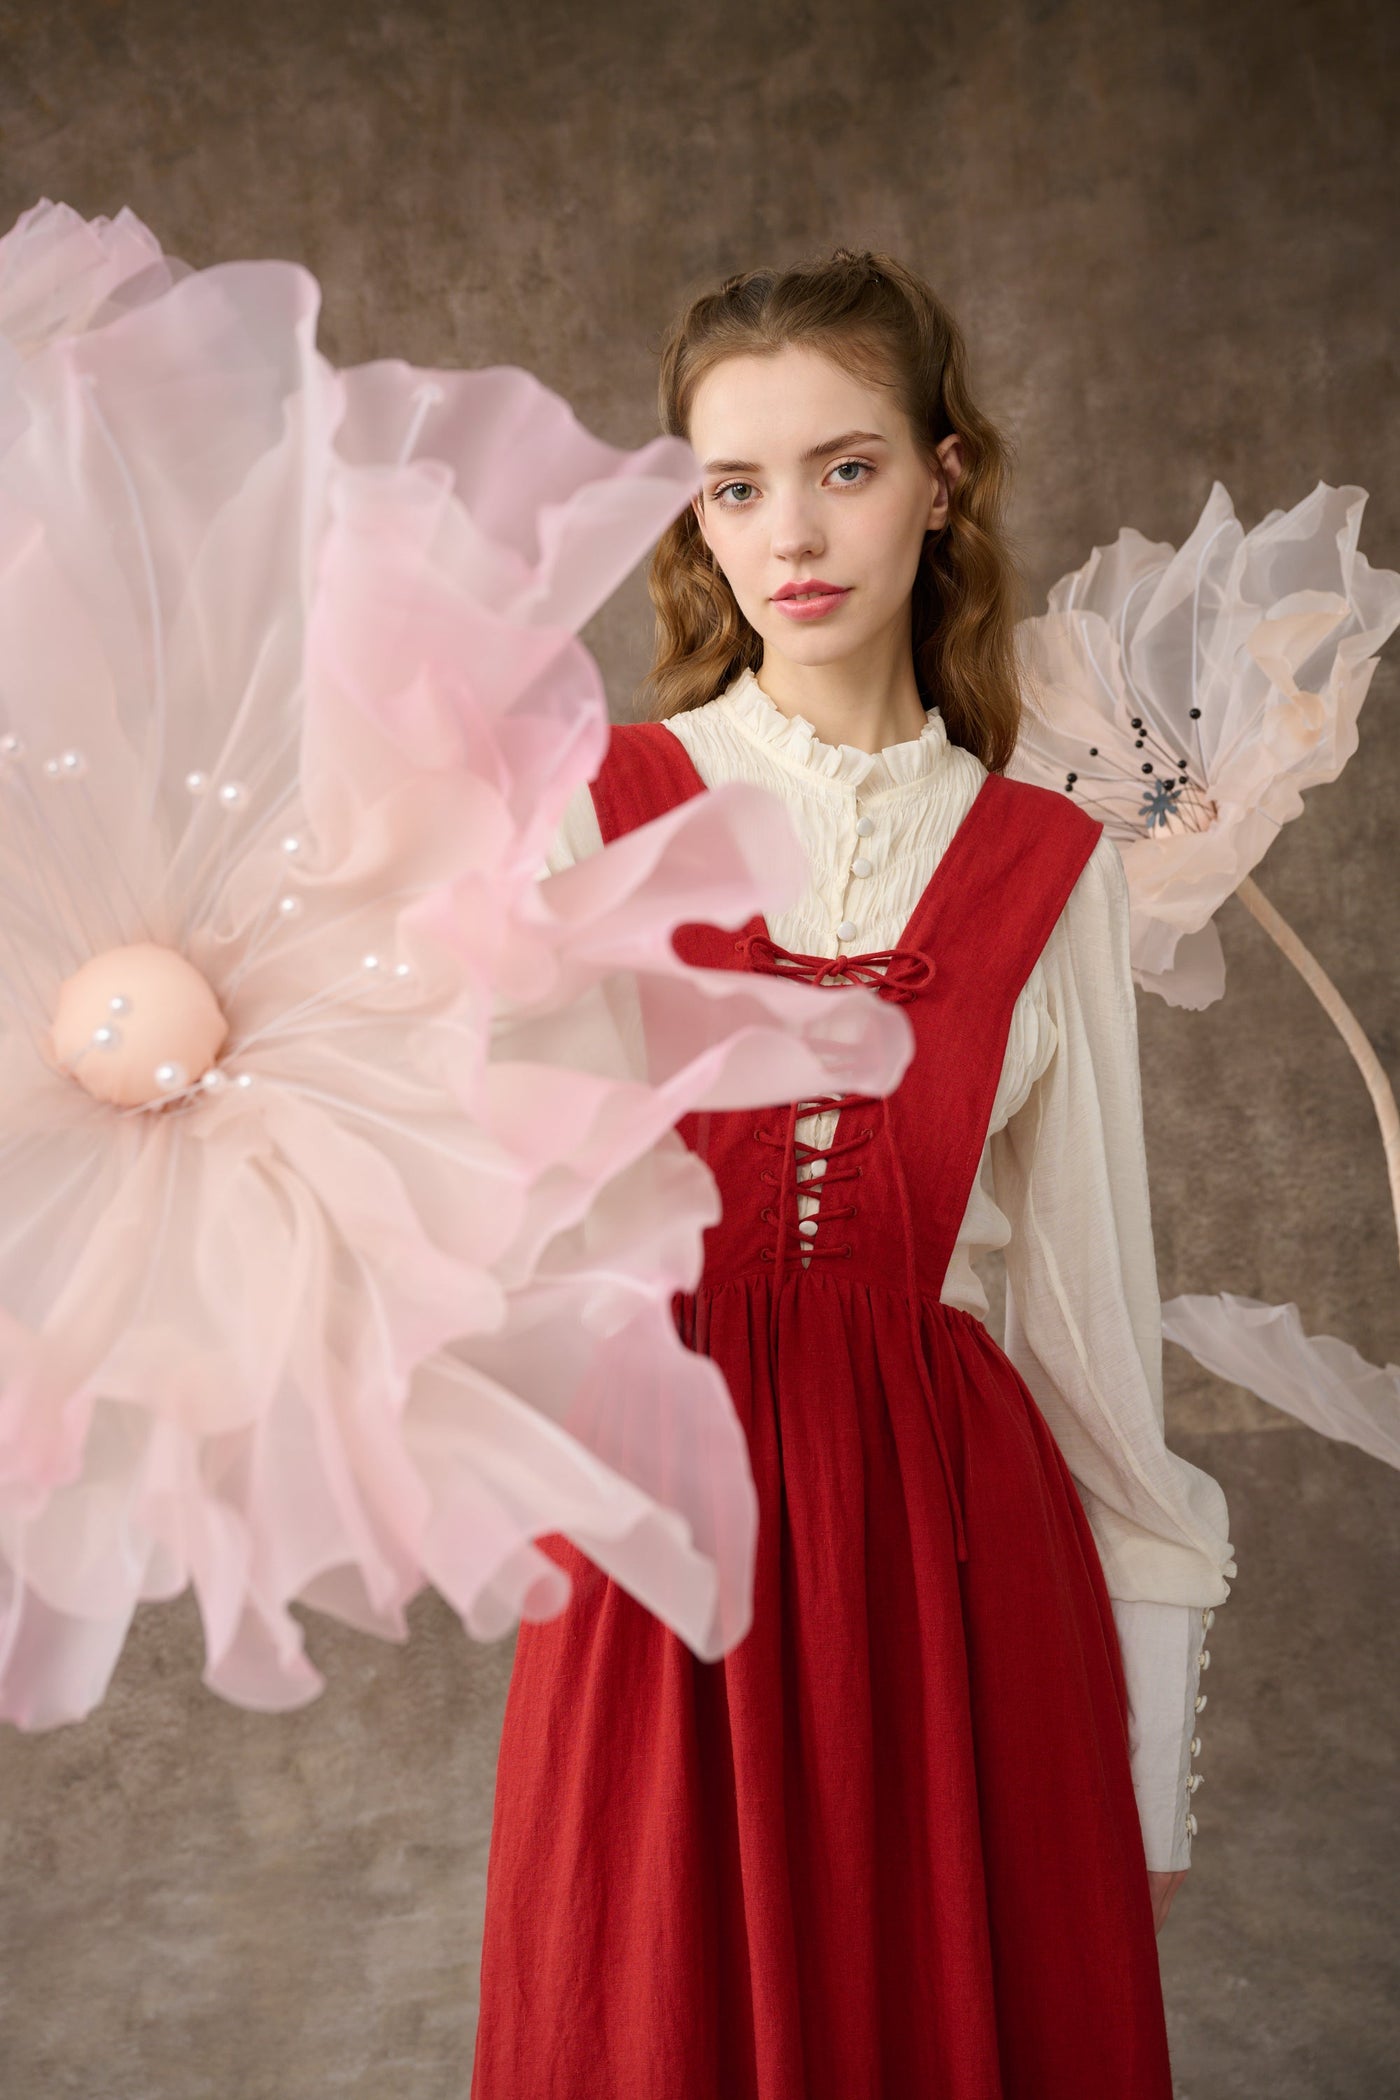 Poet's jasmine 31| lace-up pinafore linen dress in red